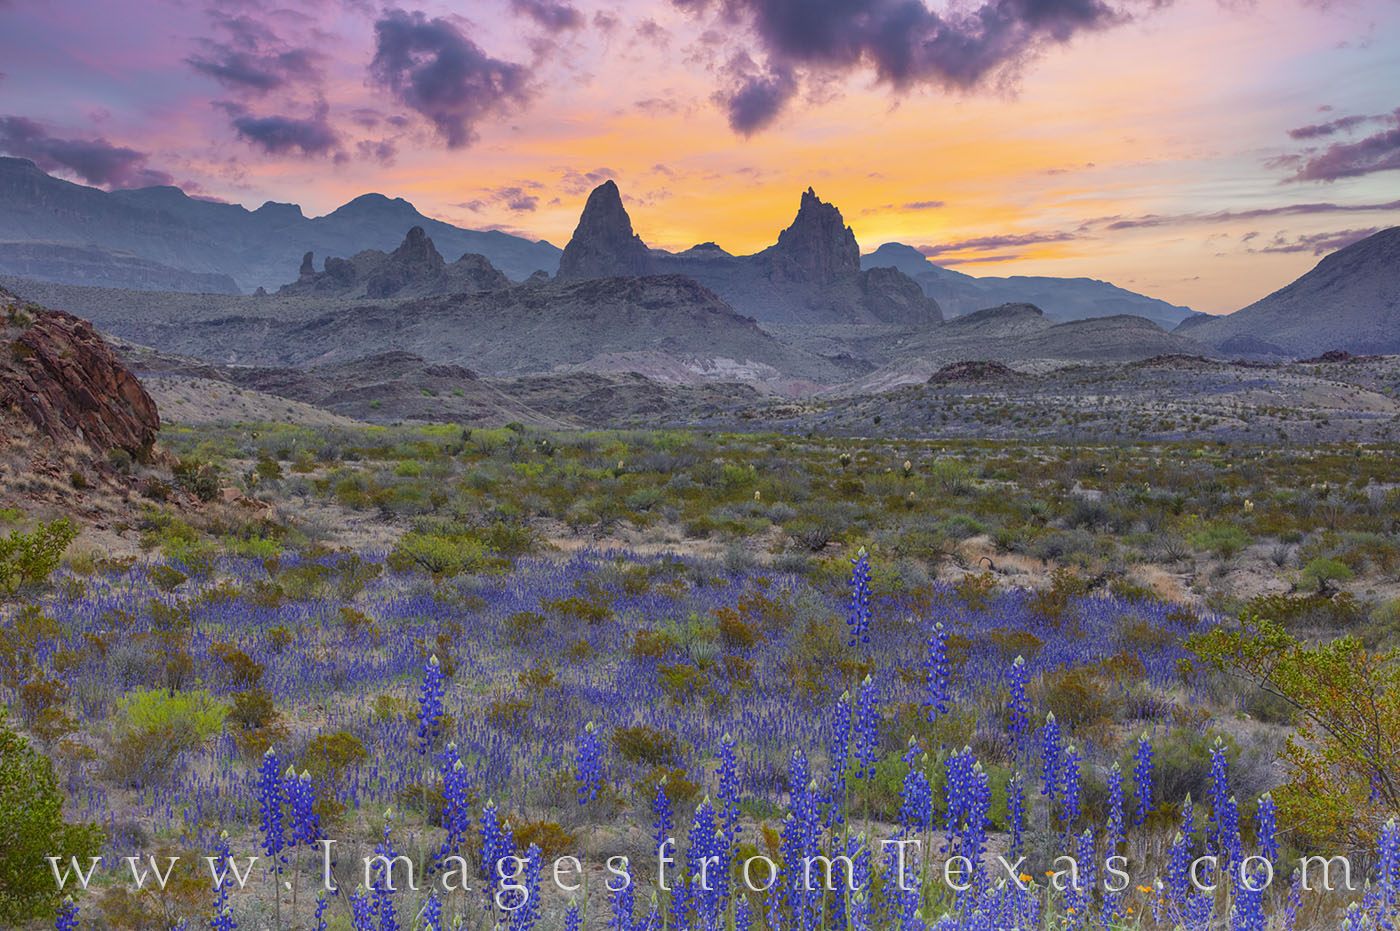 With bluebonnets at peak bloom in Big Bend National Park, this view shows the iconic land formation - the Mule Ears - on a cool...